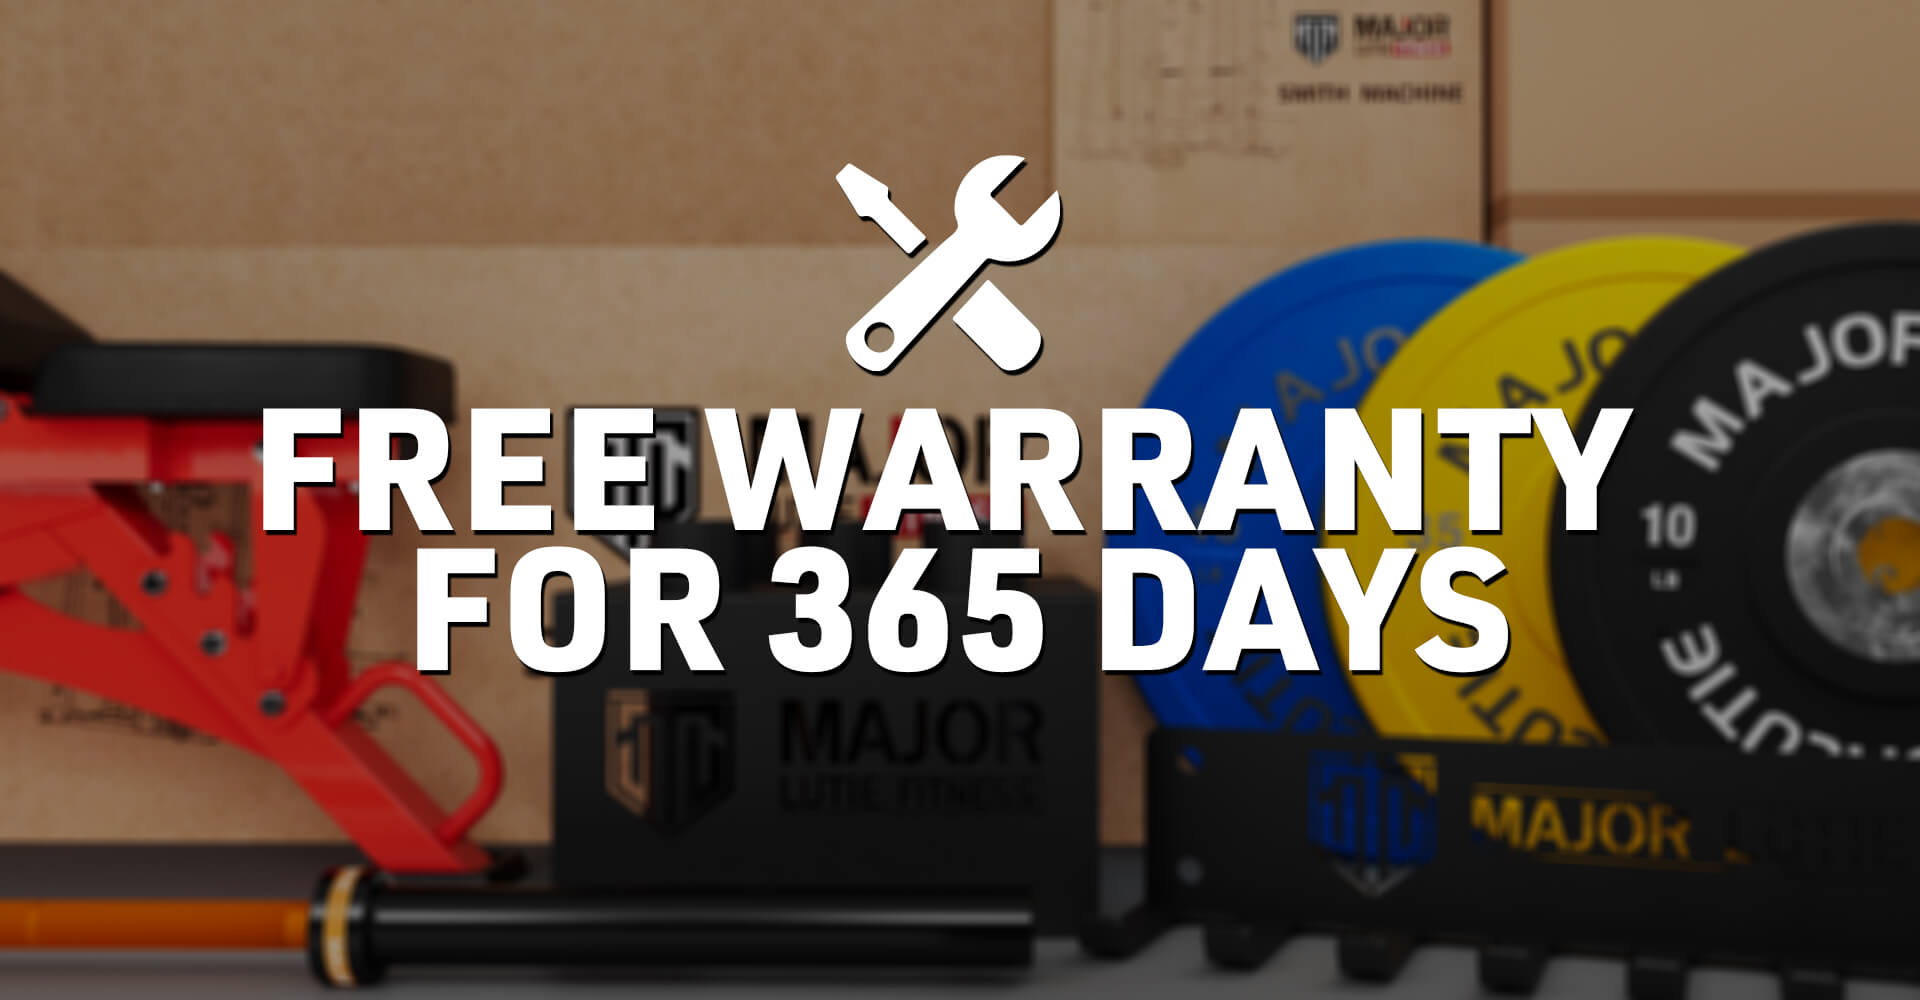 Customer satisfaction is our constant pursuit. Major Lutie provides free warranty service for 365 days from the date of receipt for cases that require warranty due to non-human factors.